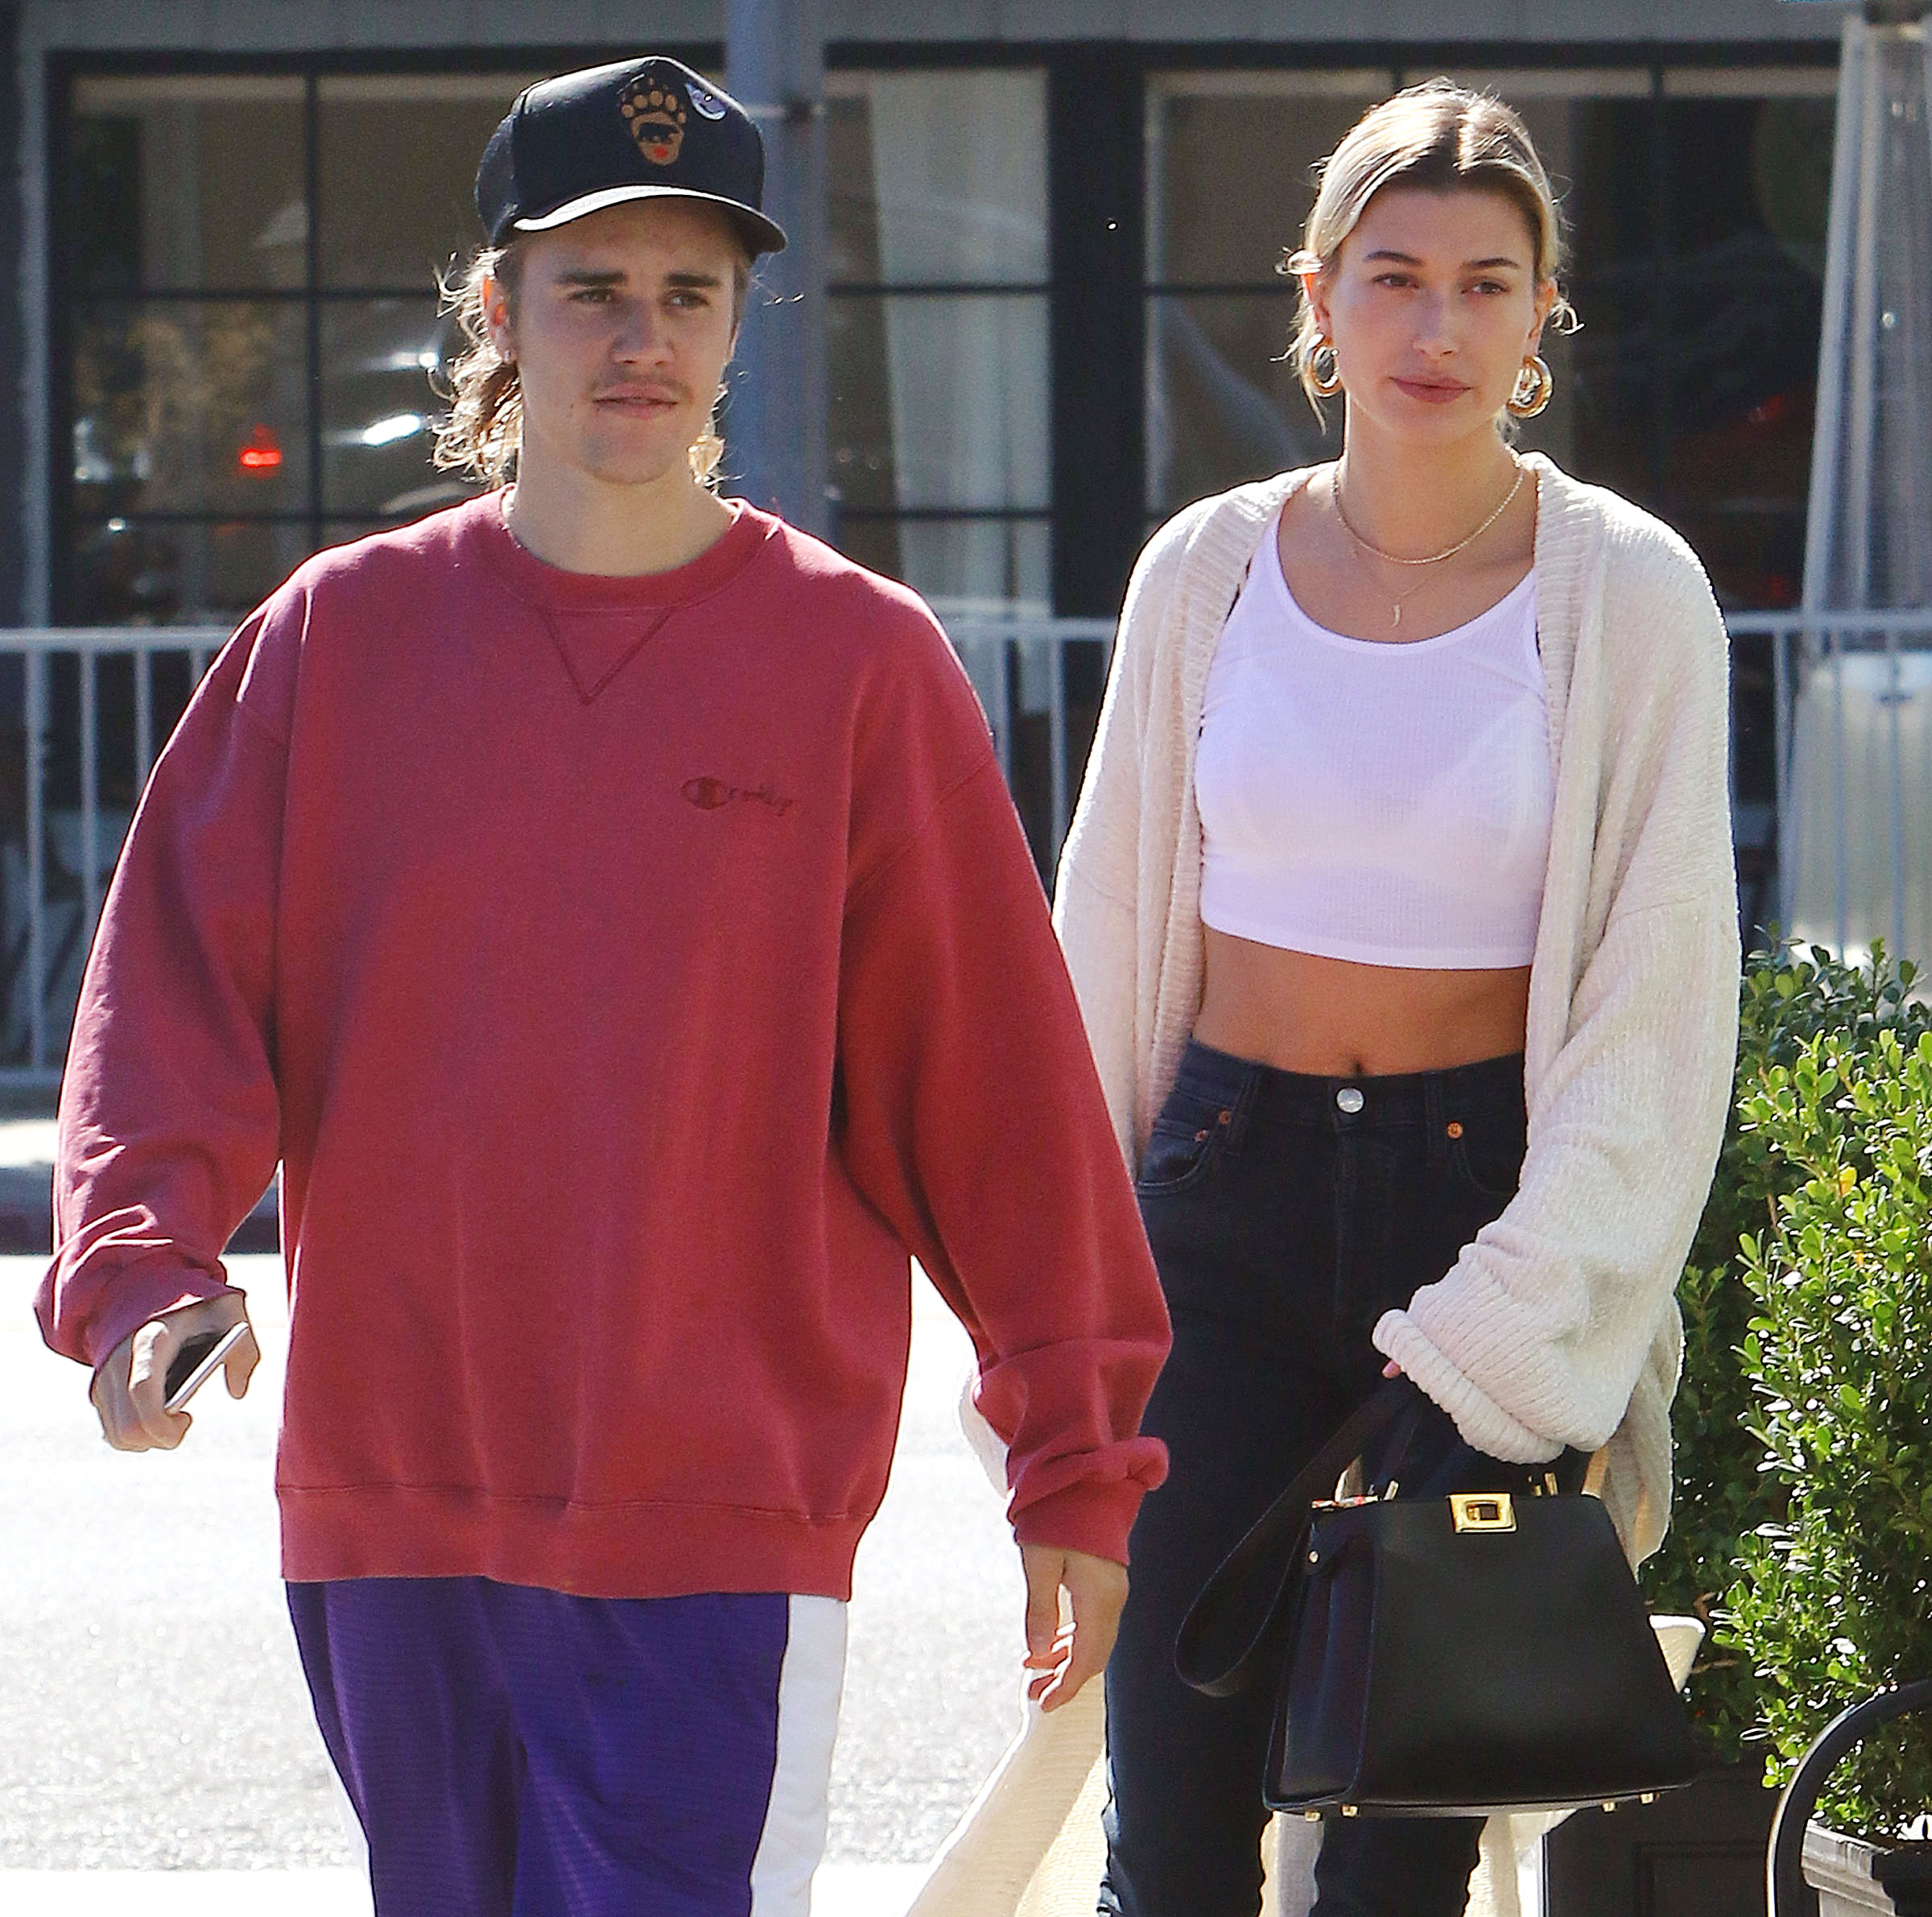 Justin Bieber Posts Throwback Photo With Wife Hailey Baldwin